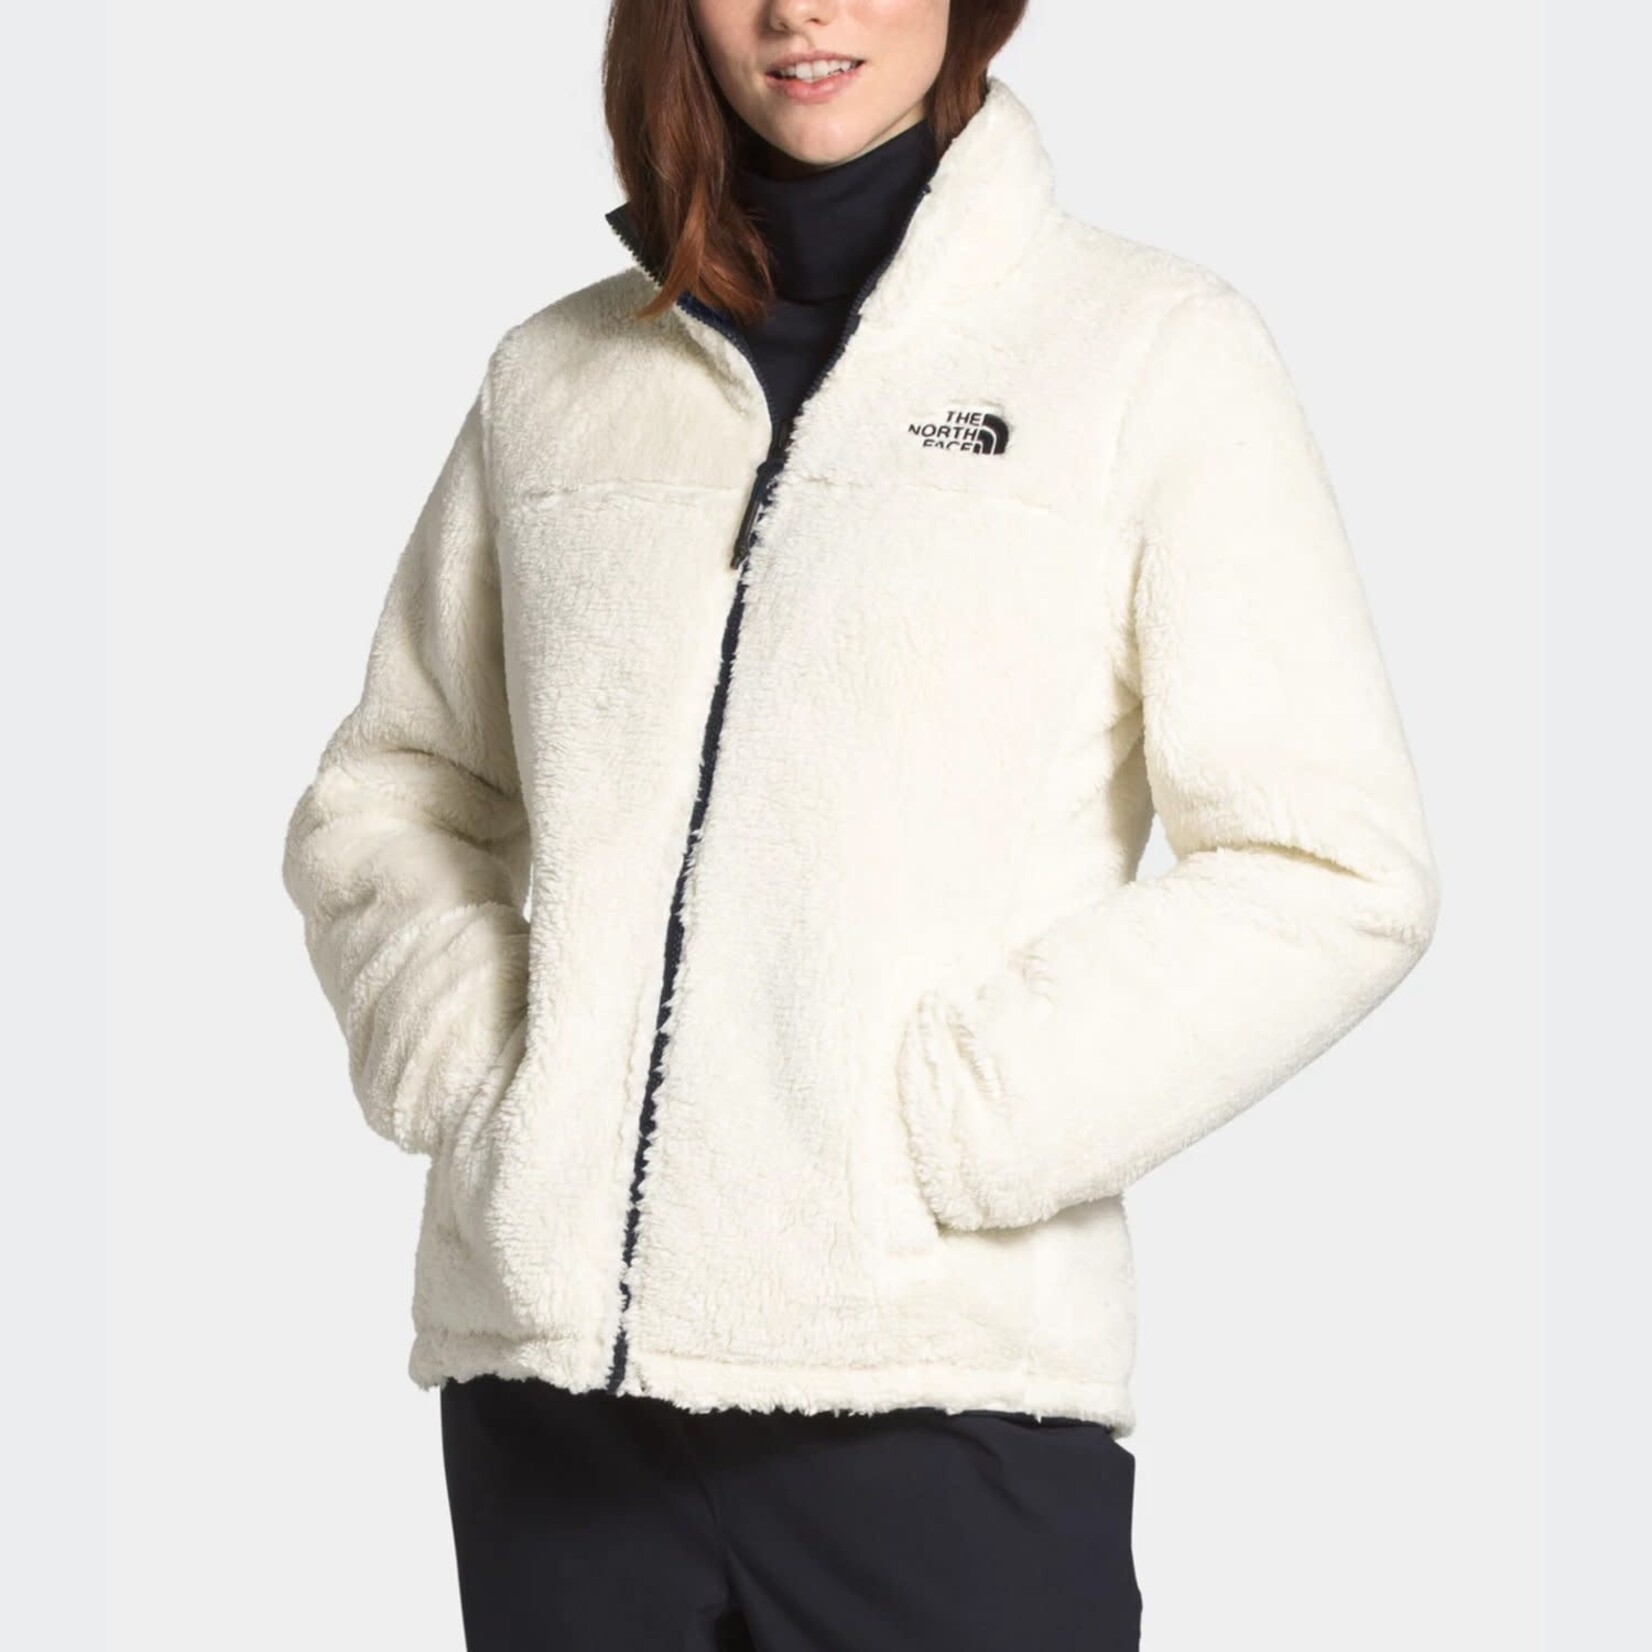 The North Face The North Face Jacket, Mossbud Insulated Reversible, Ladies